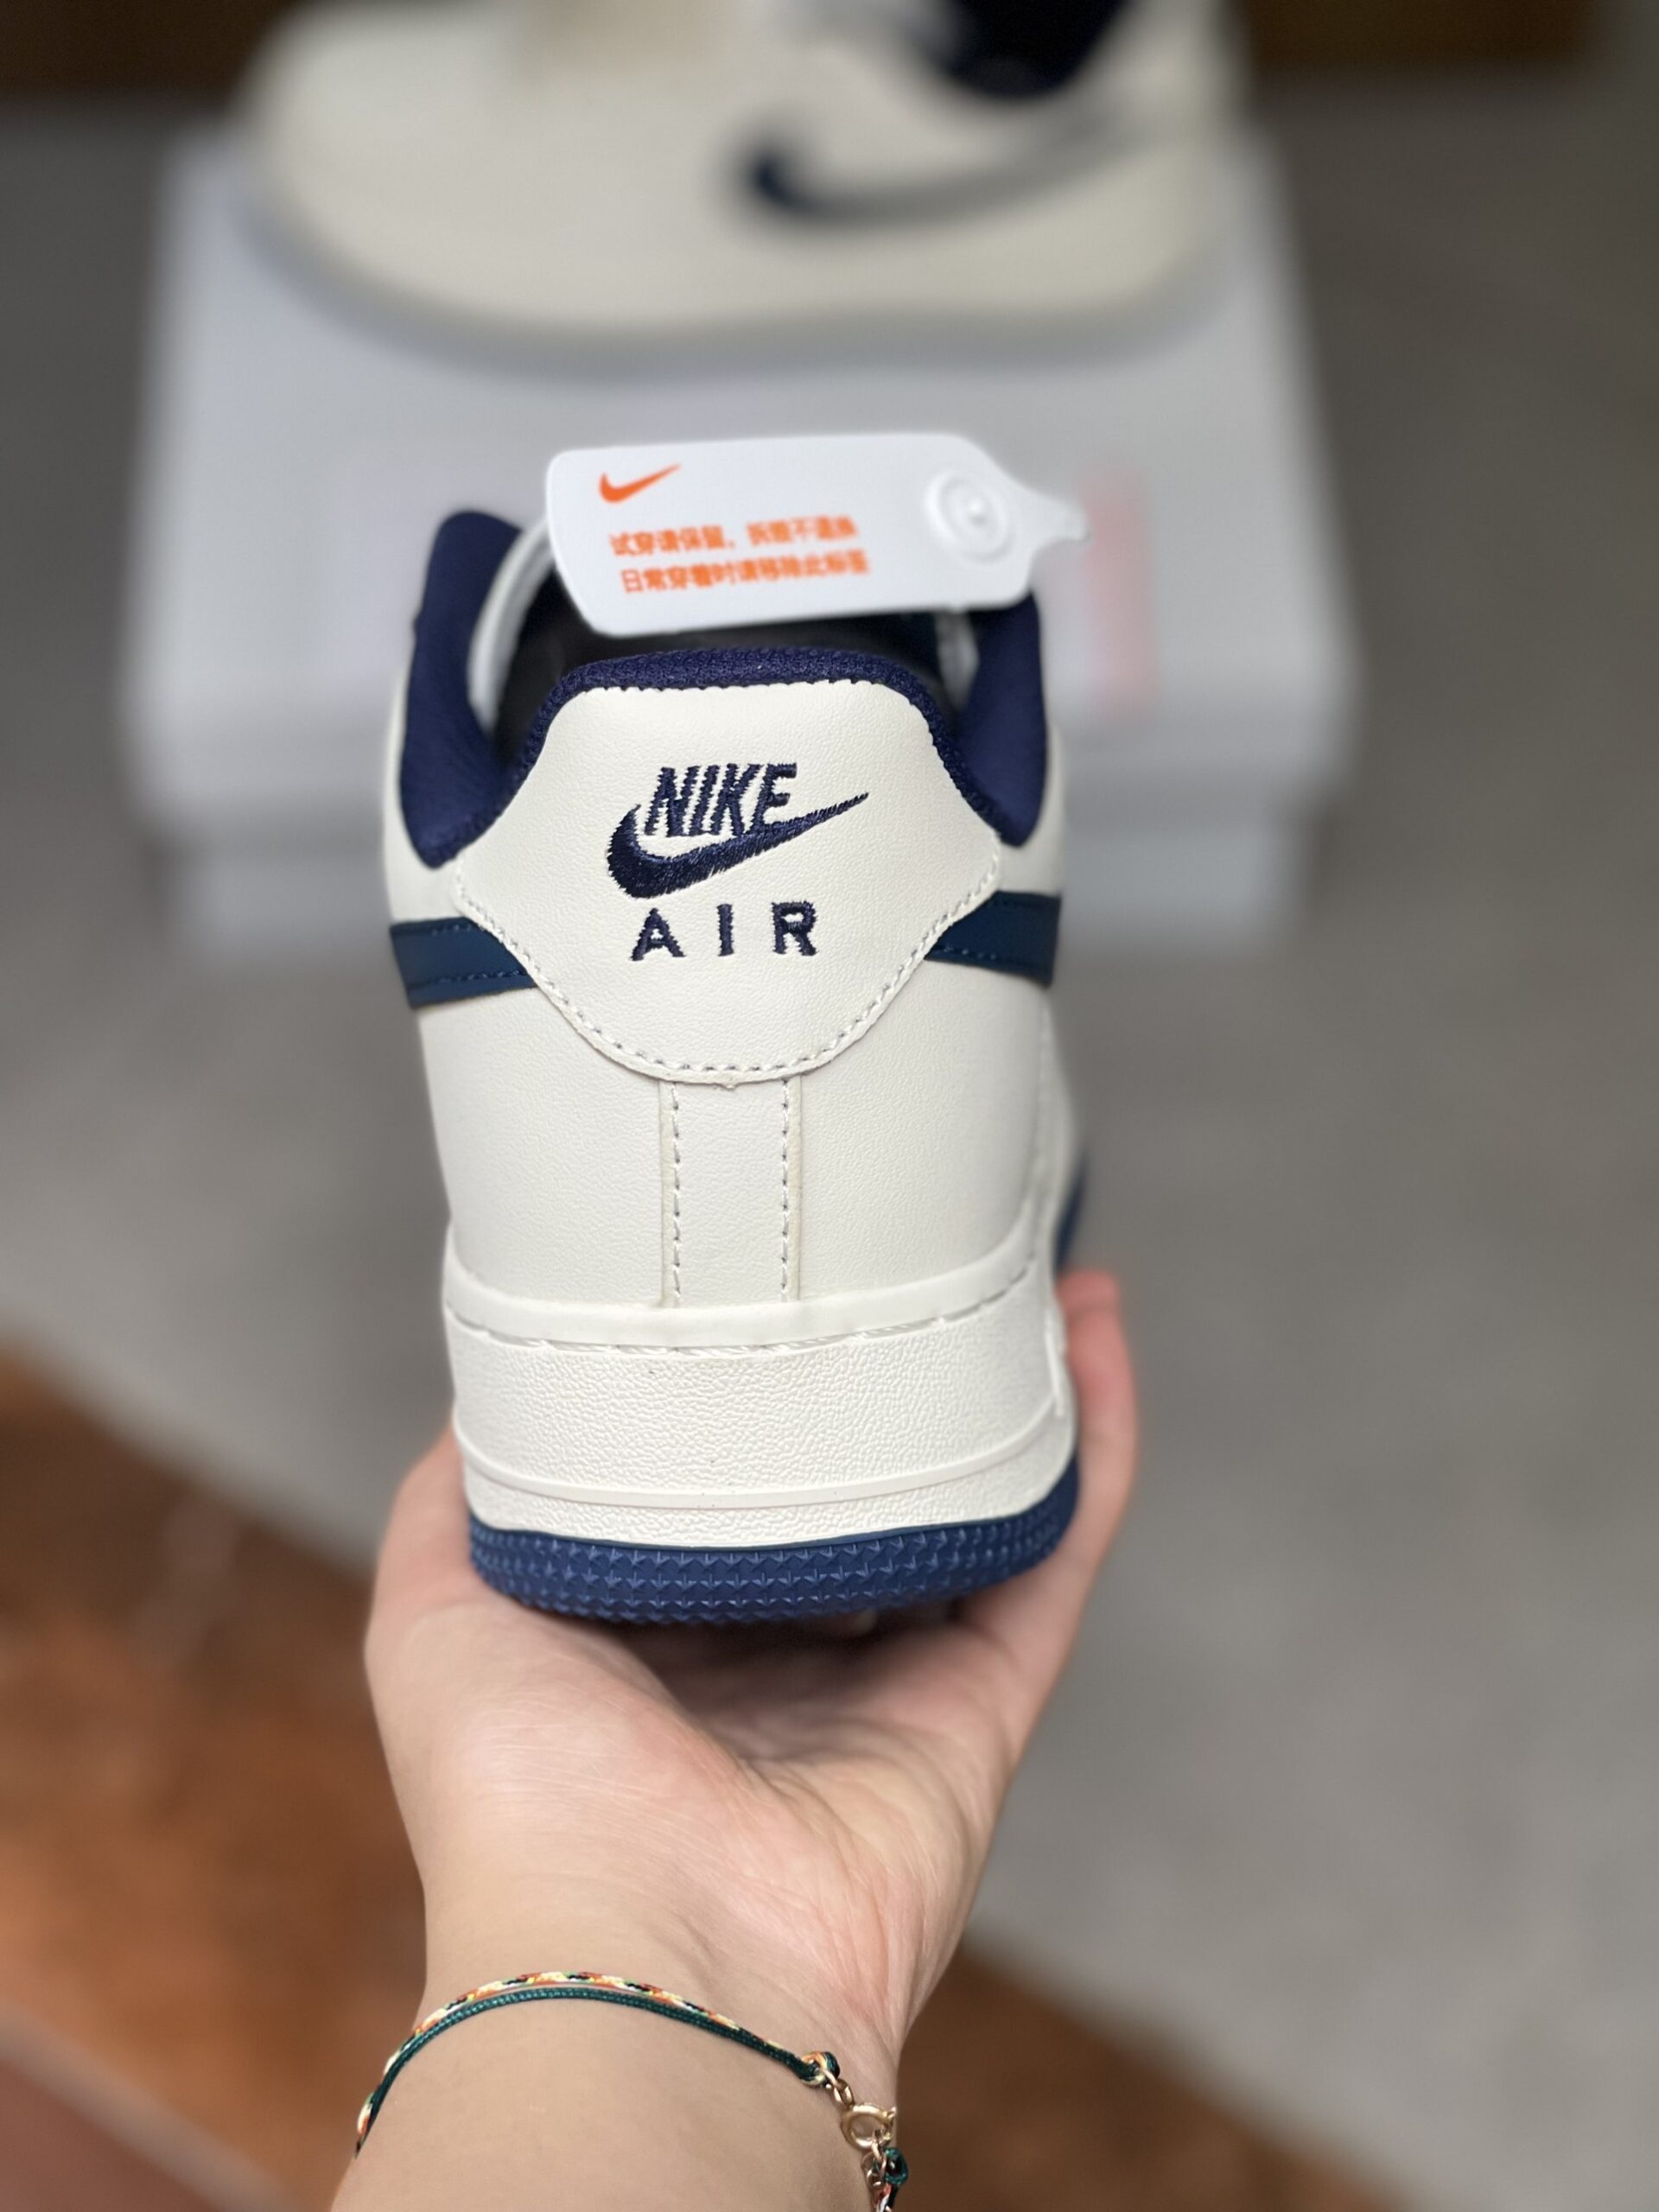 Giày Nike Air Force 1 Low 07 Cream White Navy Skate Like Auth